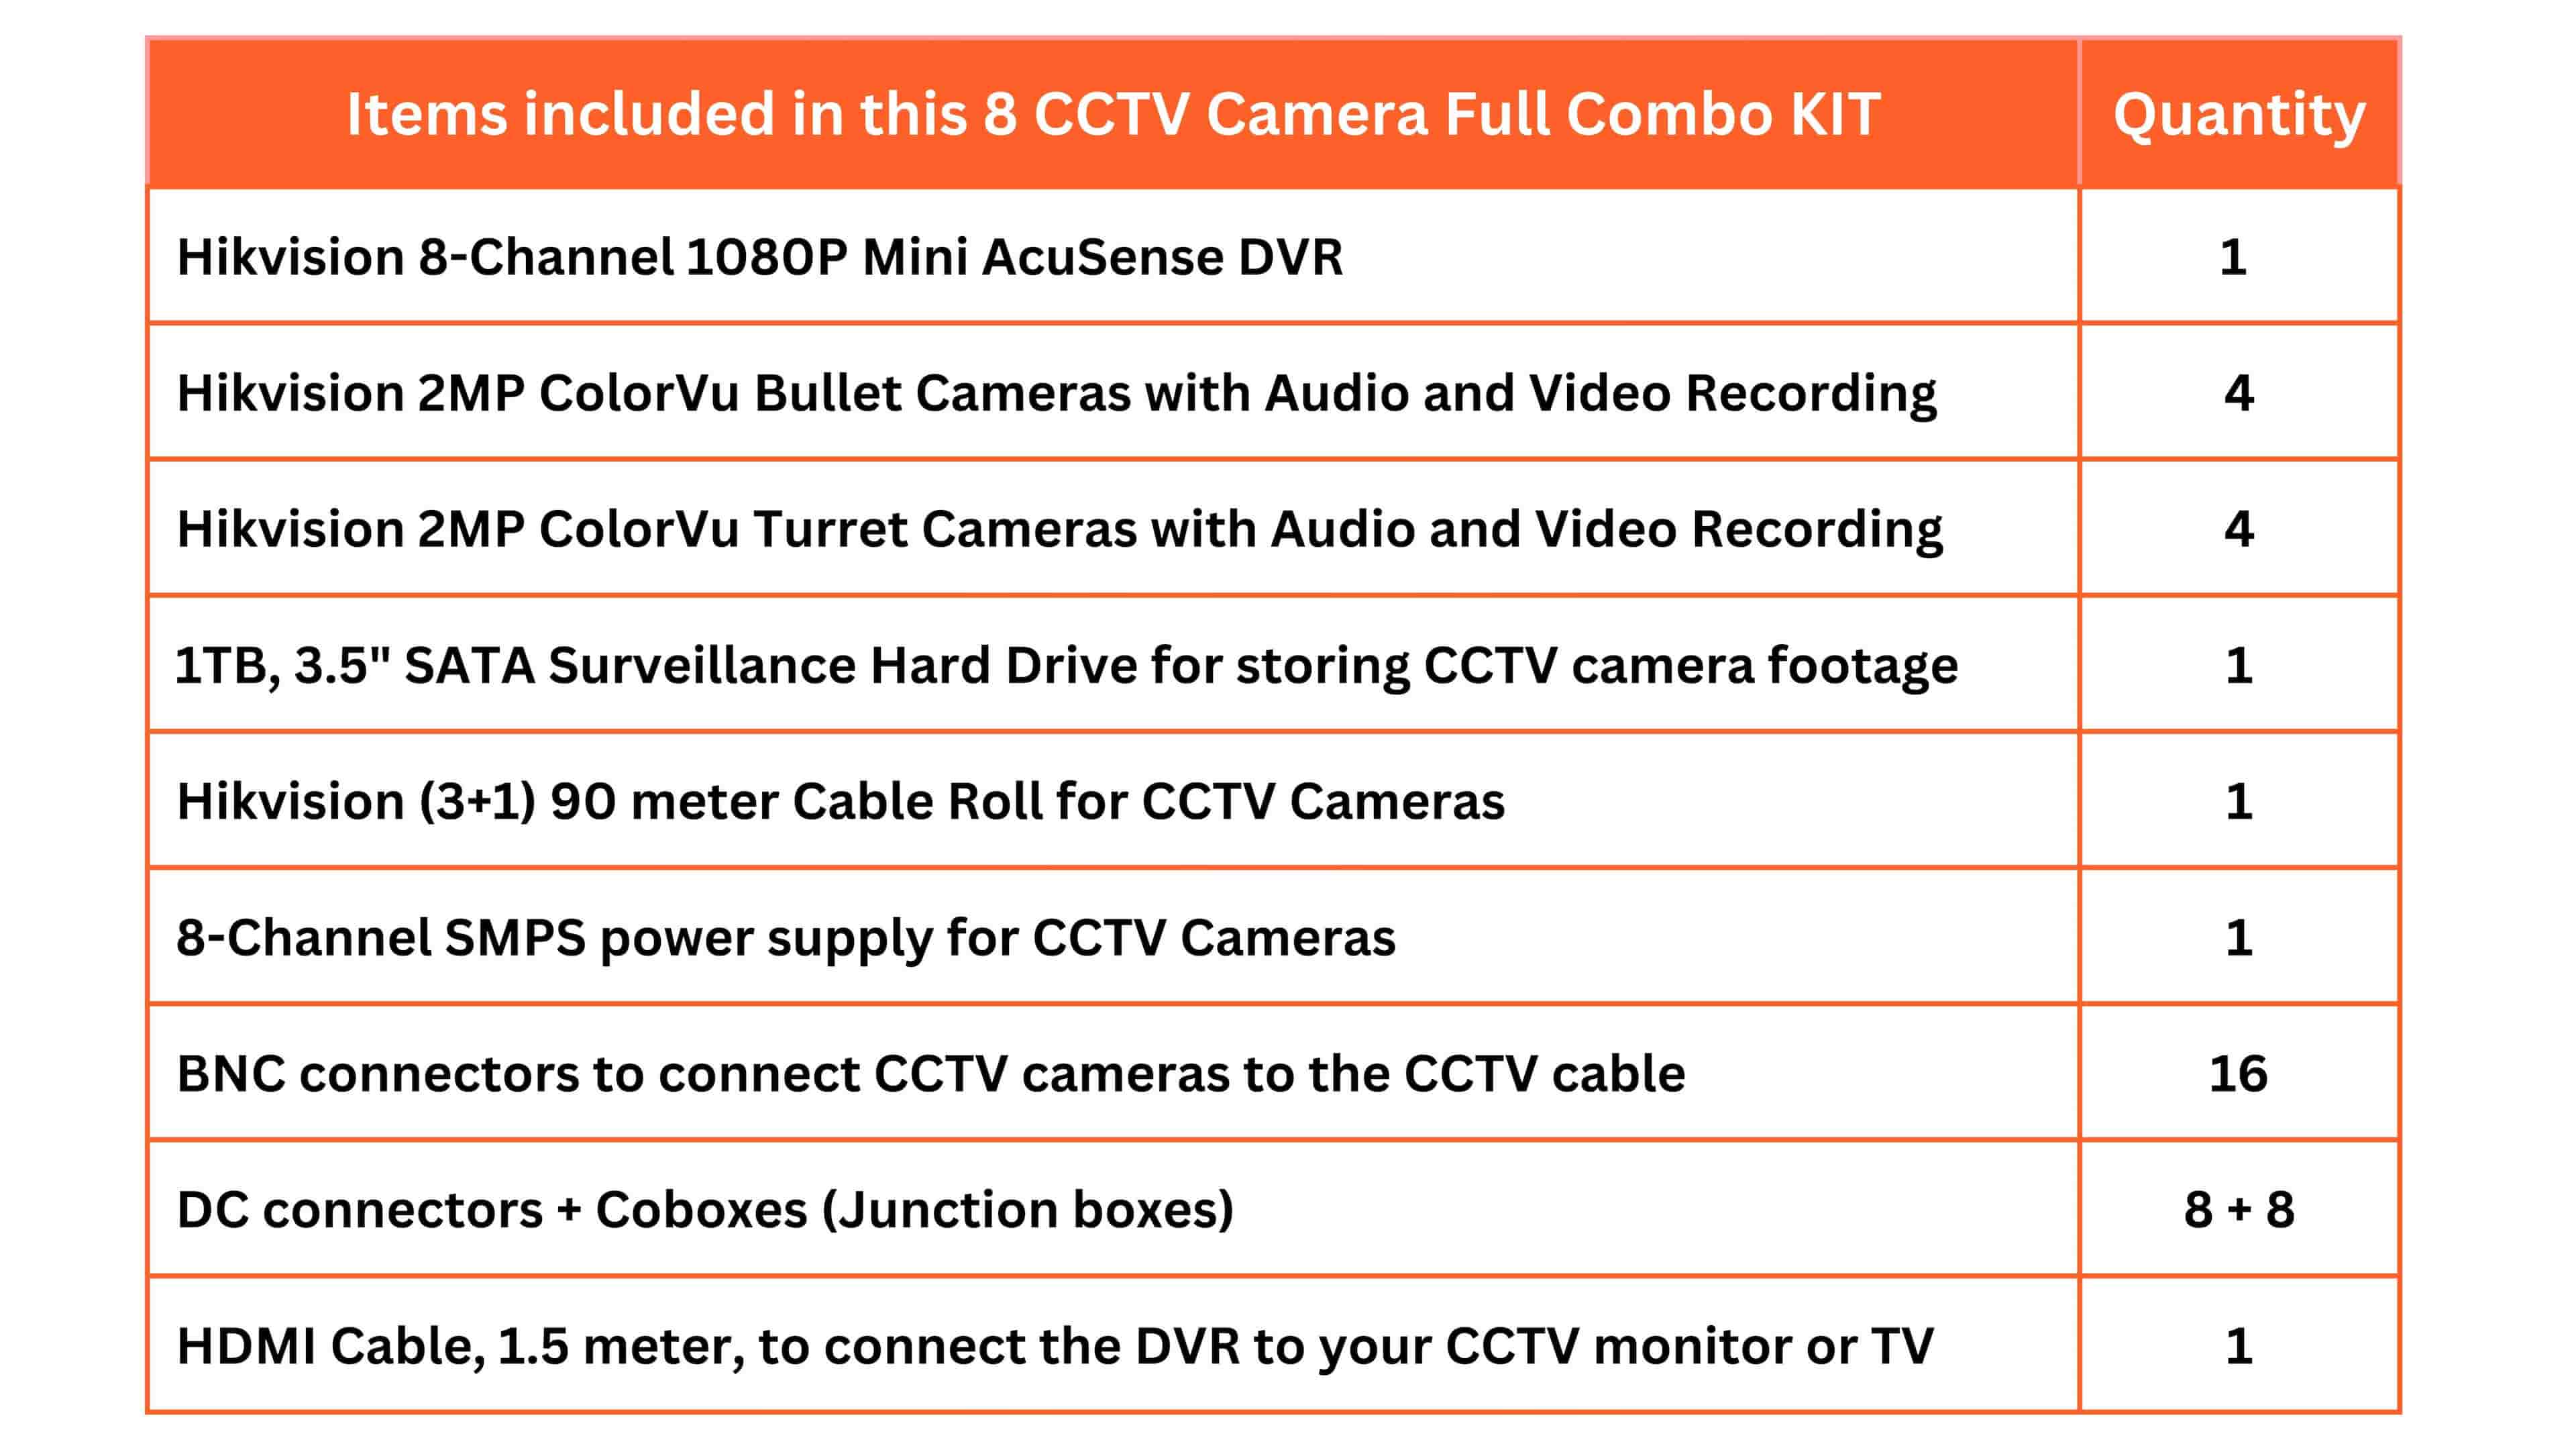 HIKVISION 8 Channel AcuSense DVR with 8x 2MP ColorVu Bullet/Turret Cameras + 1TB HDD + Cable Roll + 8 CH Power Supply + BNC, DC, Cobox & HDMI Full Kit details